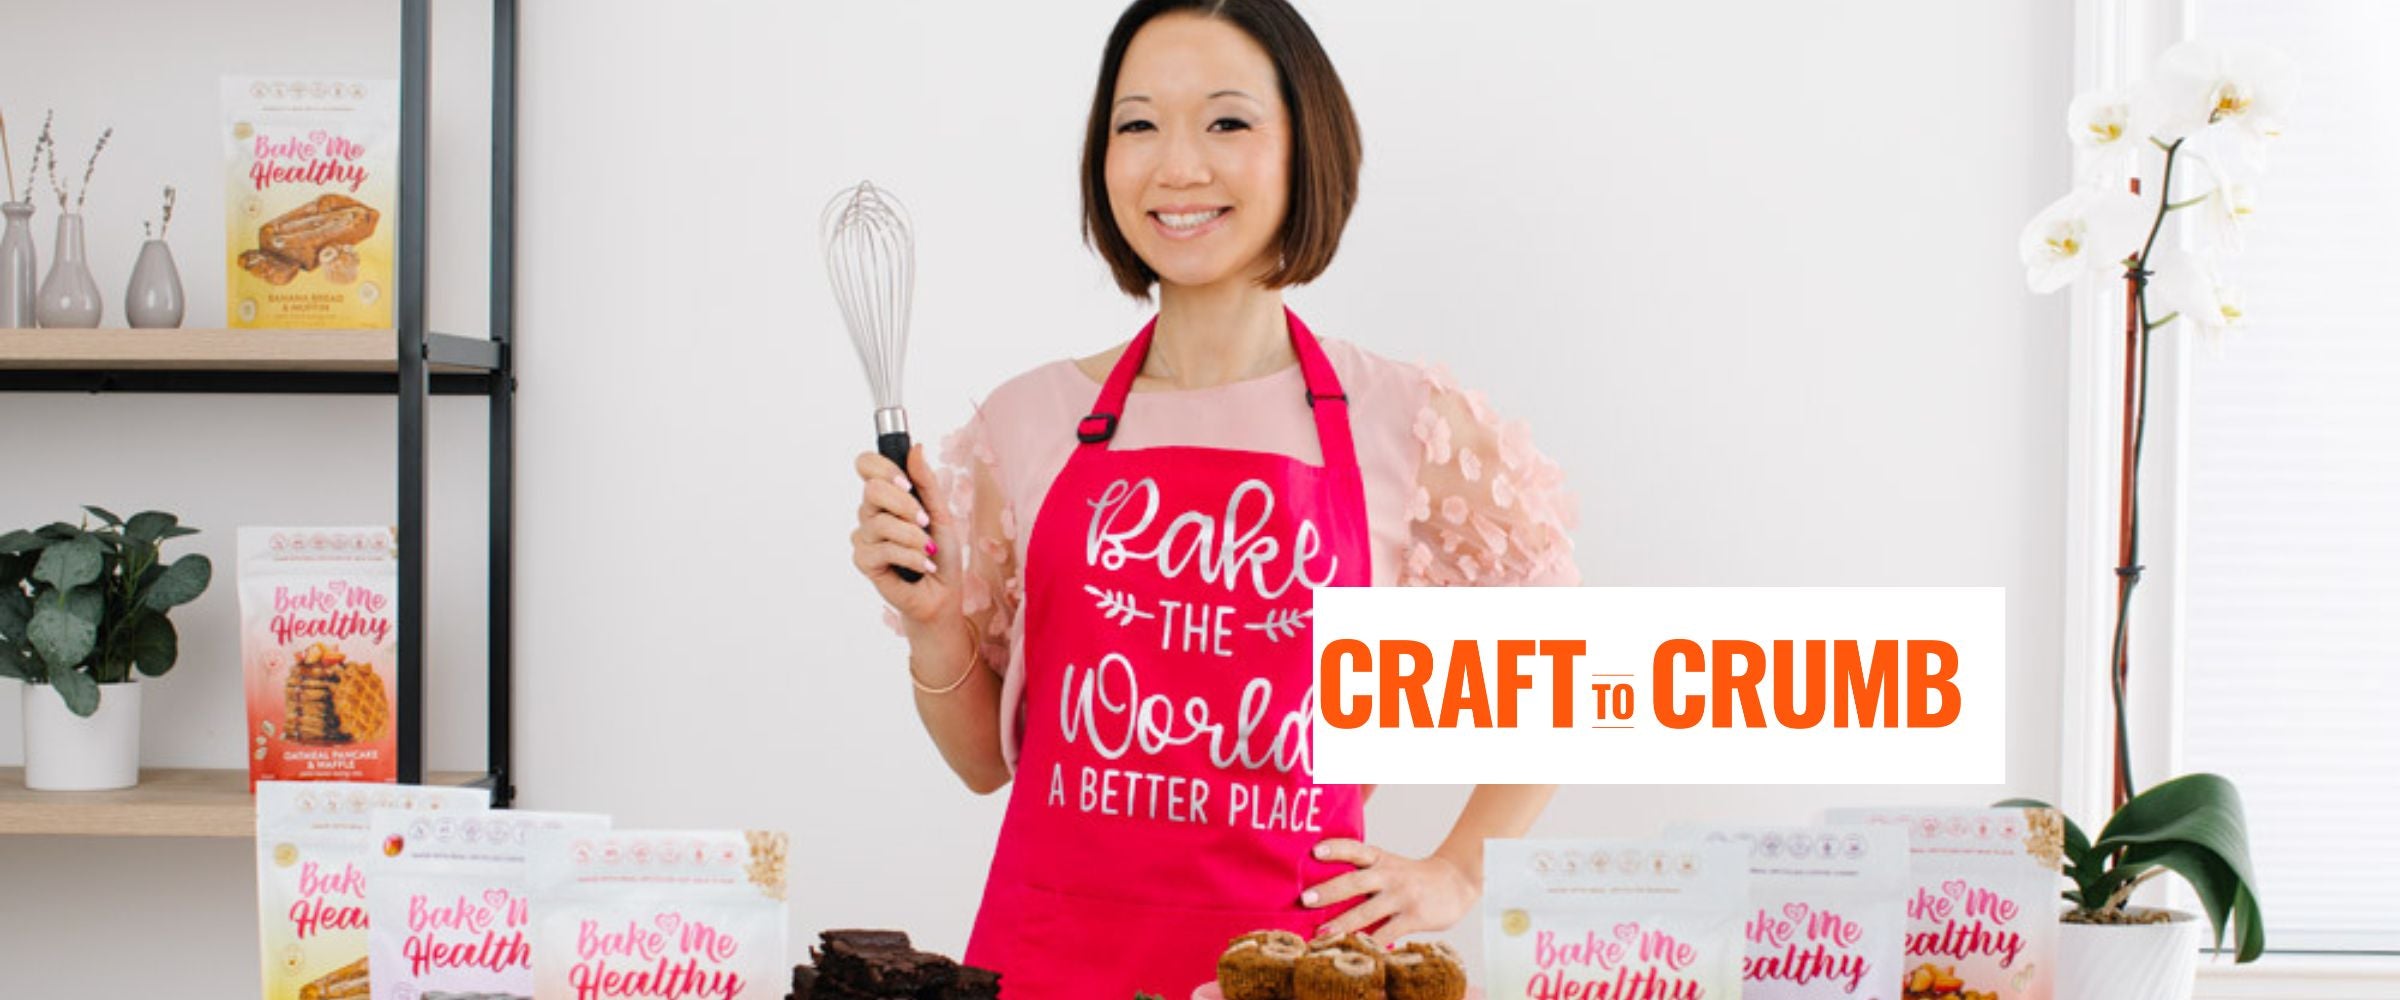 How Bake Me Healthy is disrupting the baking mix segment - Craft to Crumb